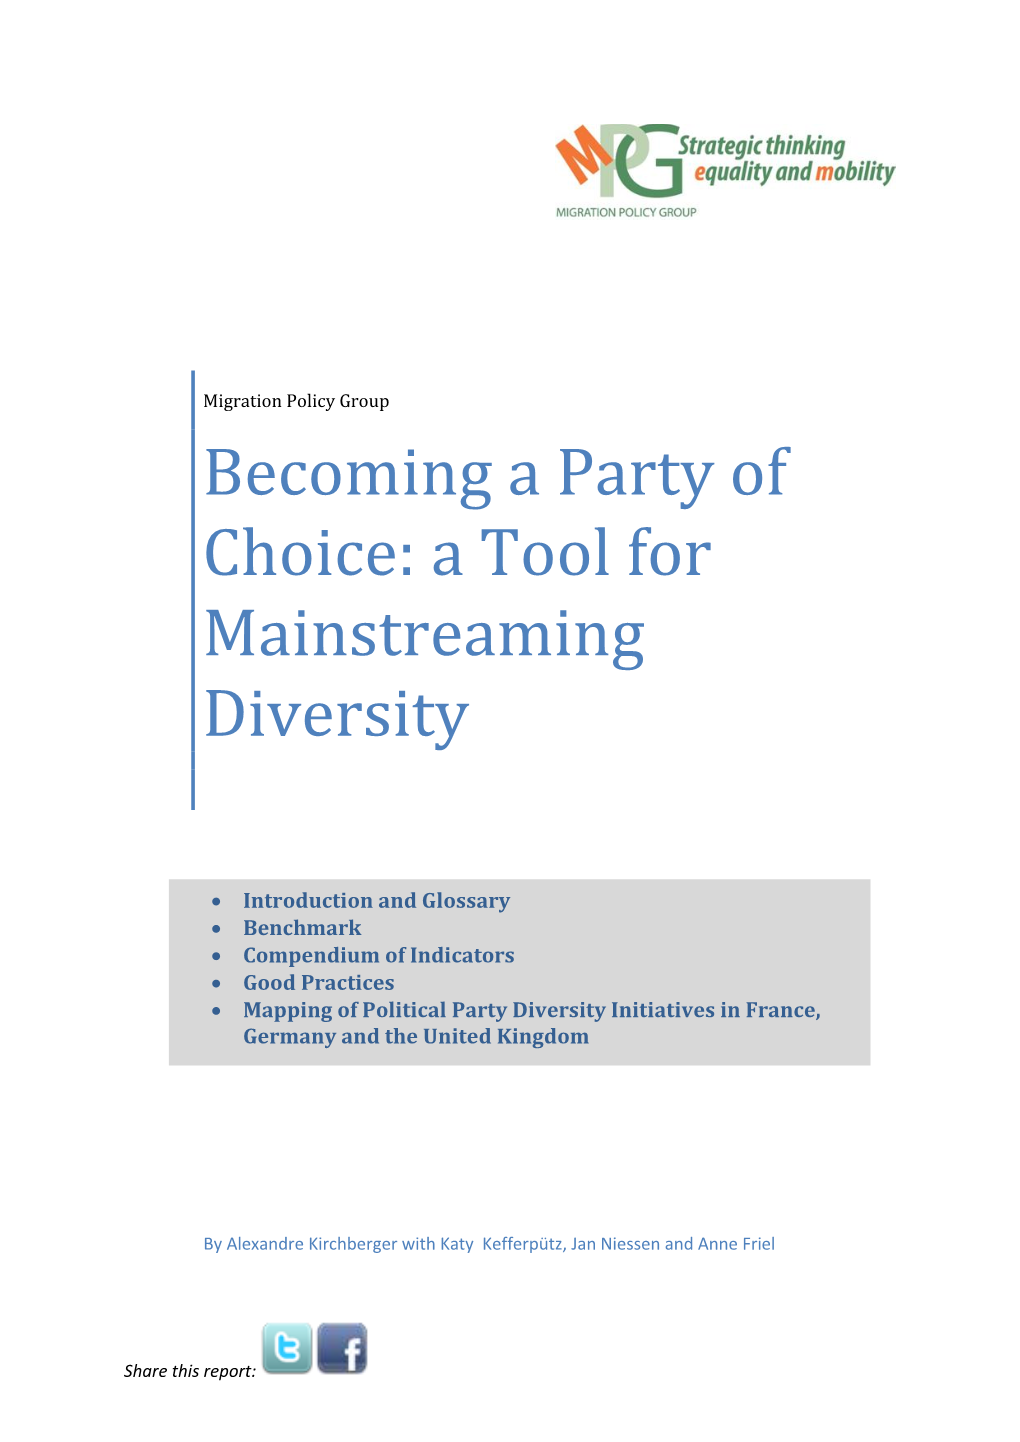 Becoming a Party of Choice: a Tool for Mainstreaming Diversity